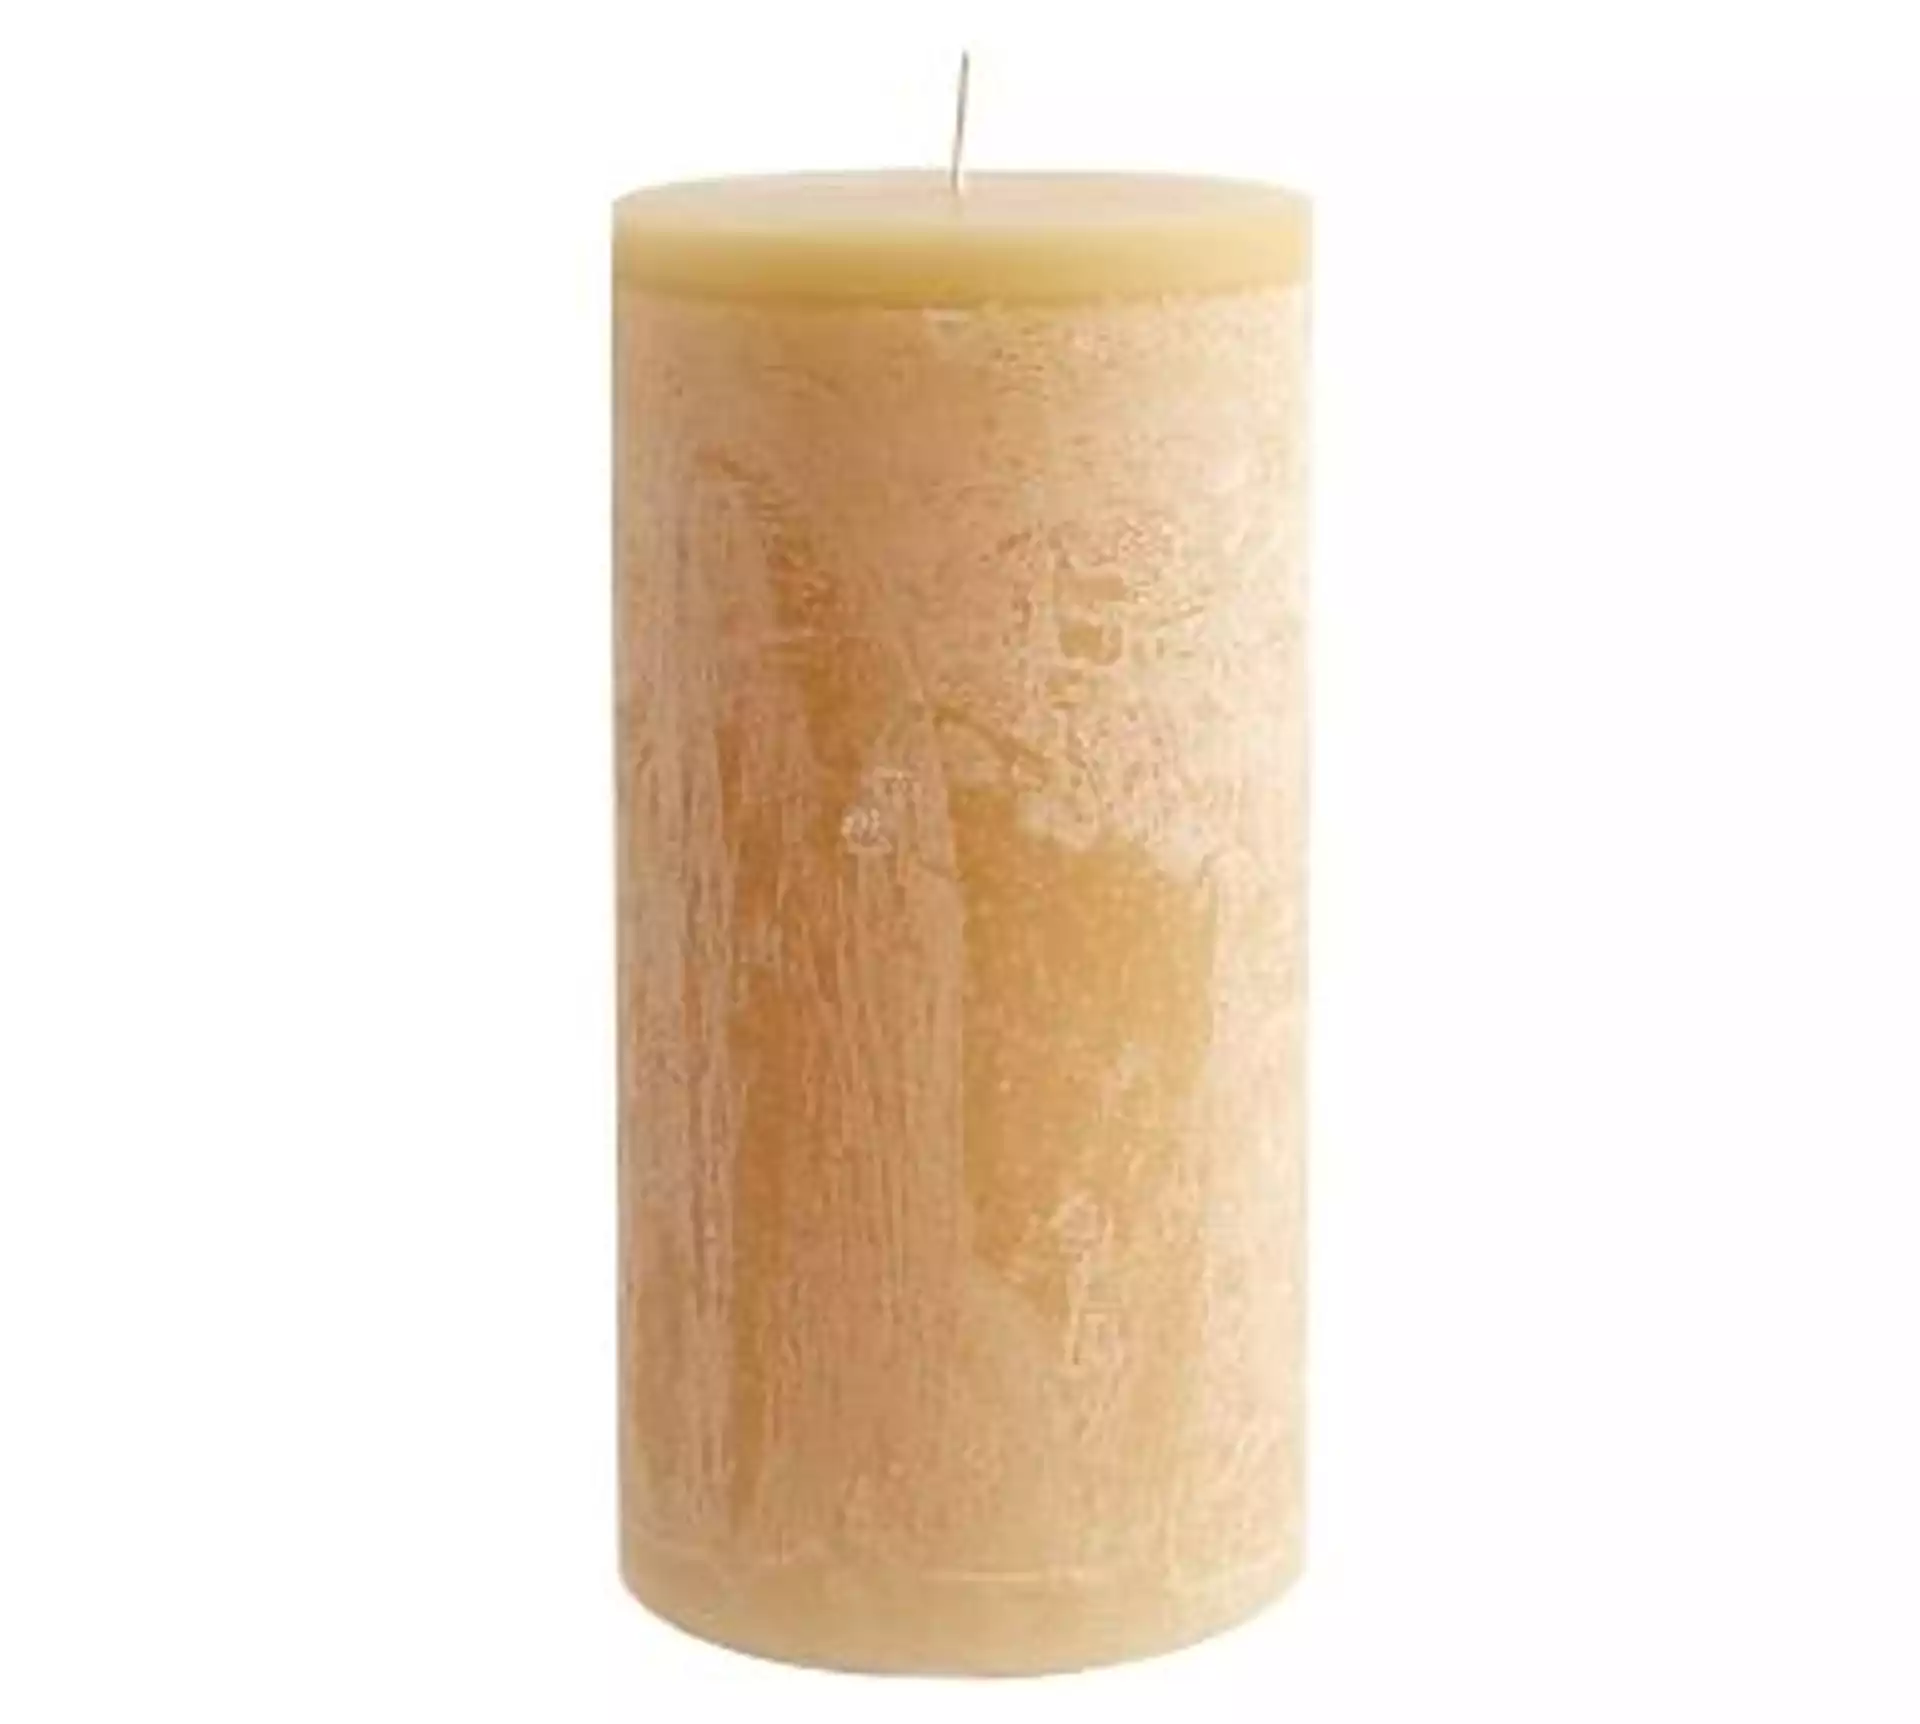 Scented Timber Pillar Candles, Ivory, Honeysuckle, 4" x 4.5"